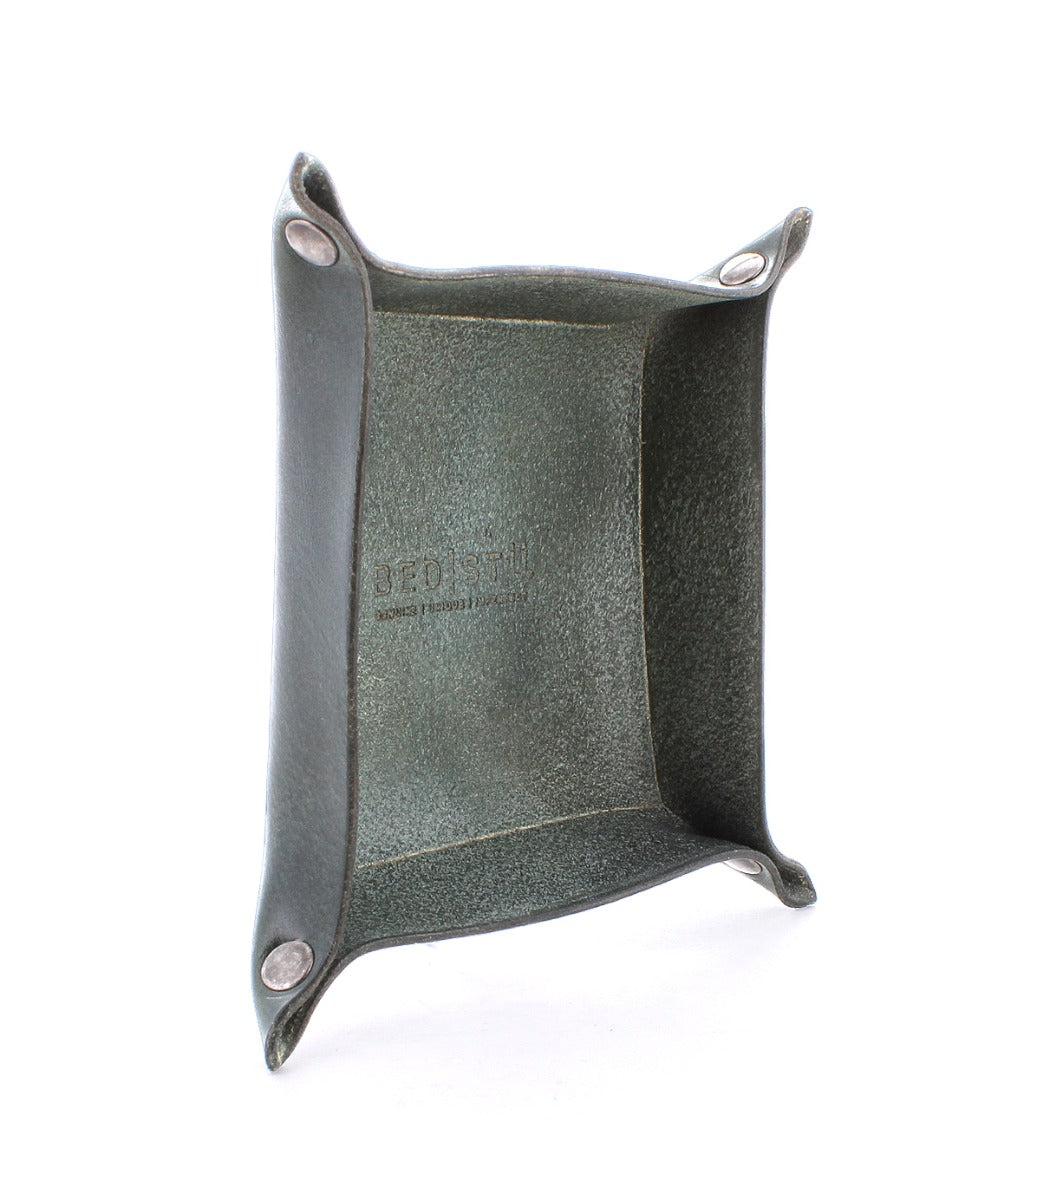 An Expanse square black leather tray with two screws on it by Bed Stu.